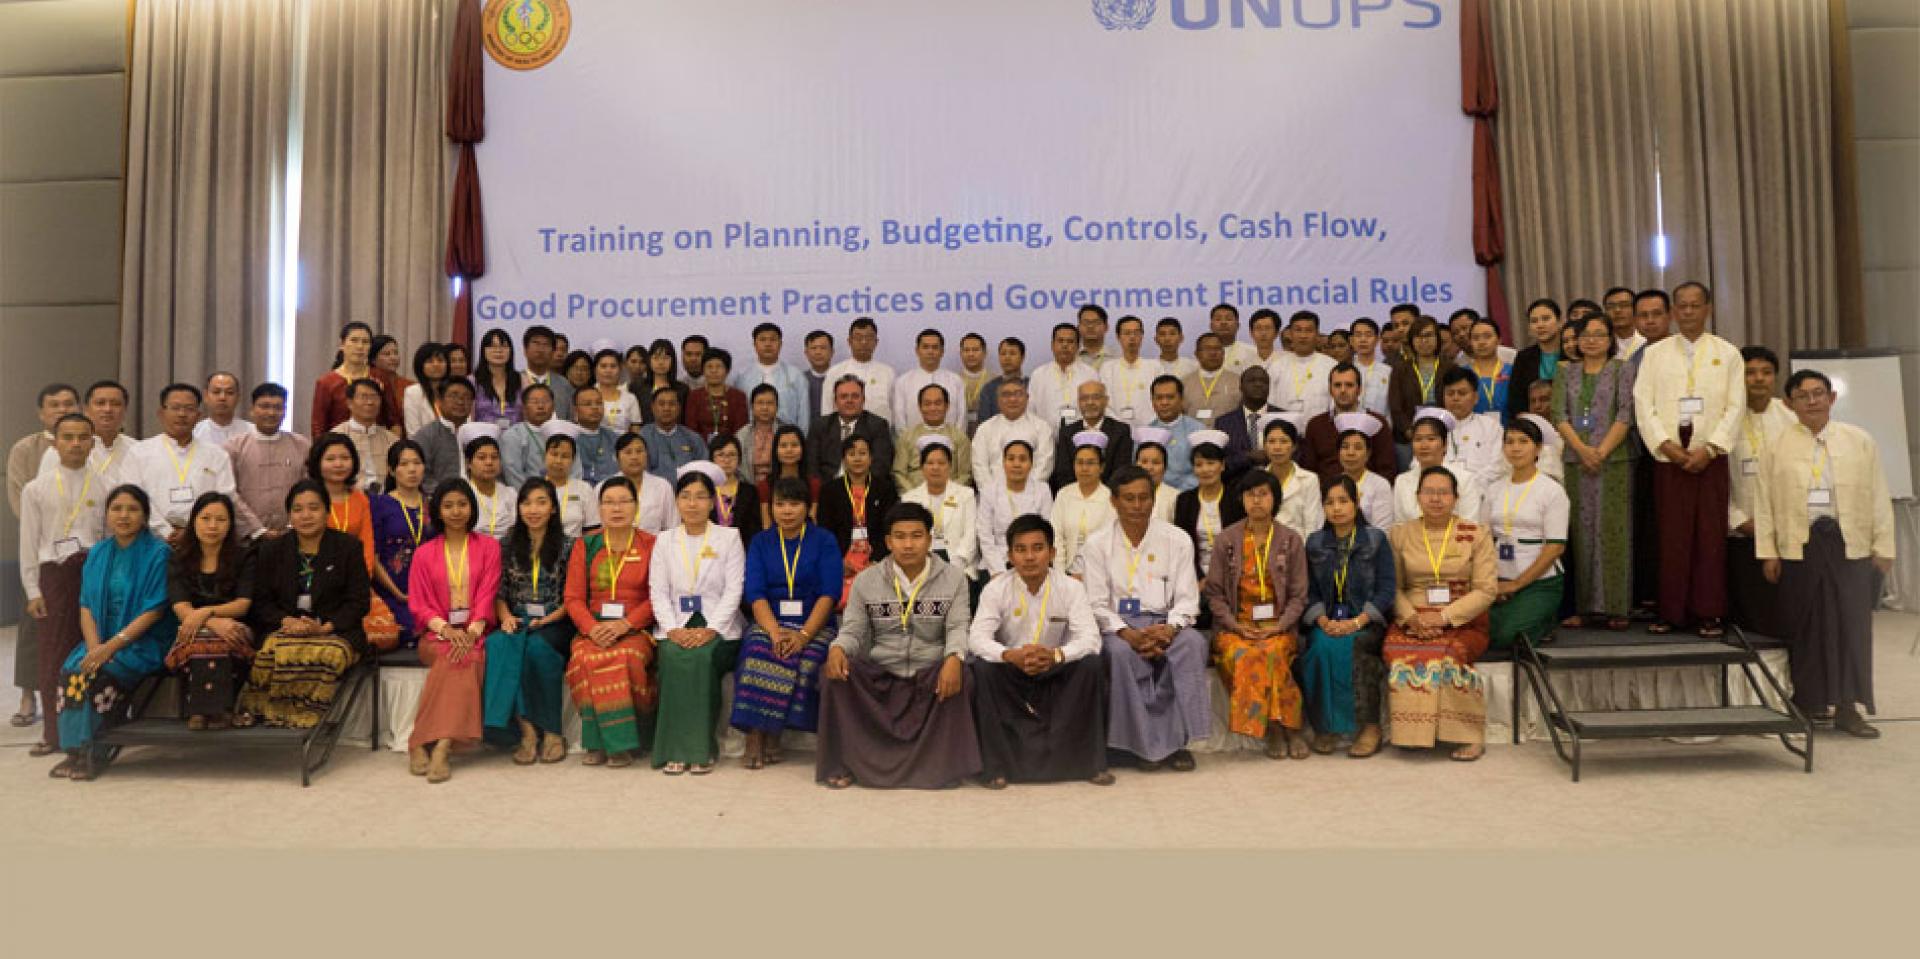 Union Minister for Health and Sports H.E. Dr Myint Htwe with officials from the Ministry of Health and Sports, UNOPS and participating government health staff from across the country, after the opening session of the third batch of training, Nay Pyi Taw, 6 November 2017.